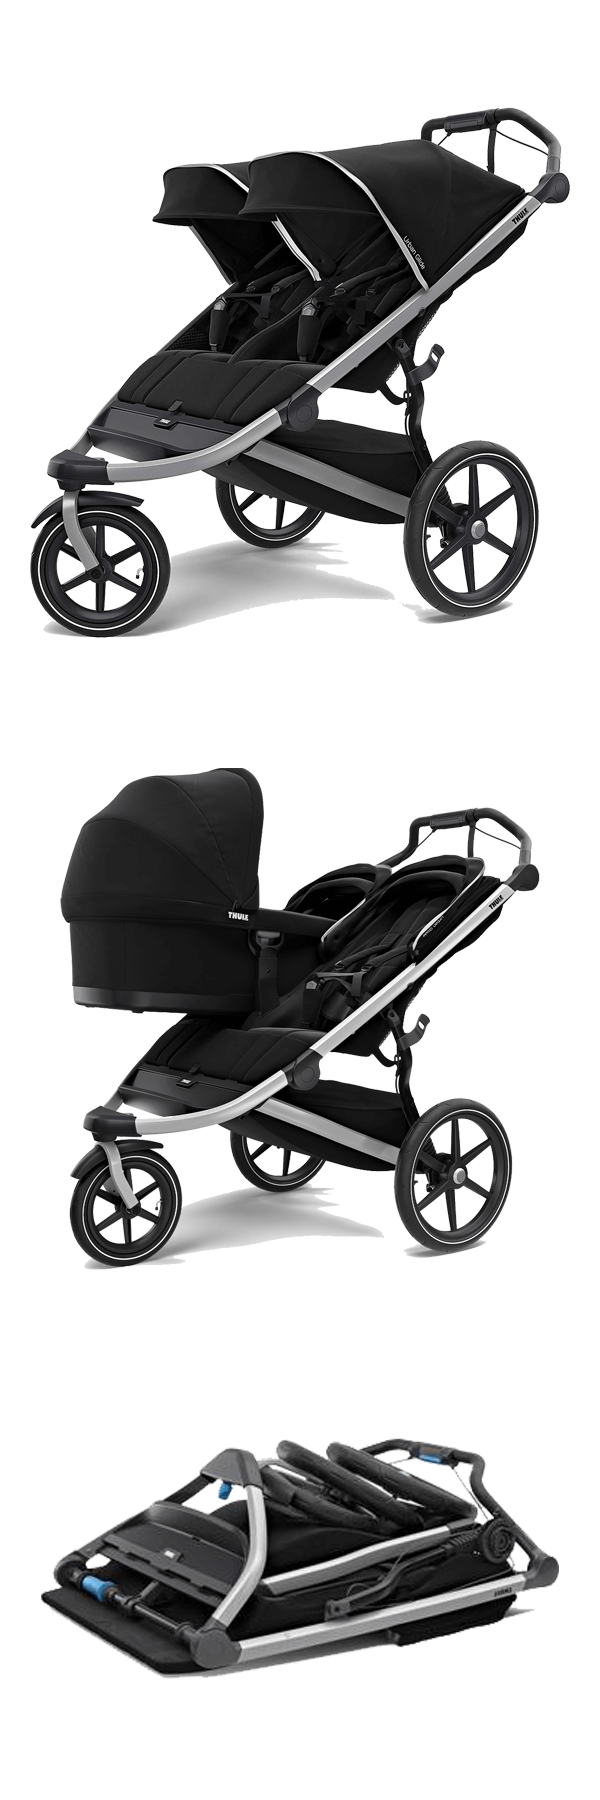 Thule Urban Glide 2 Double stroller positions